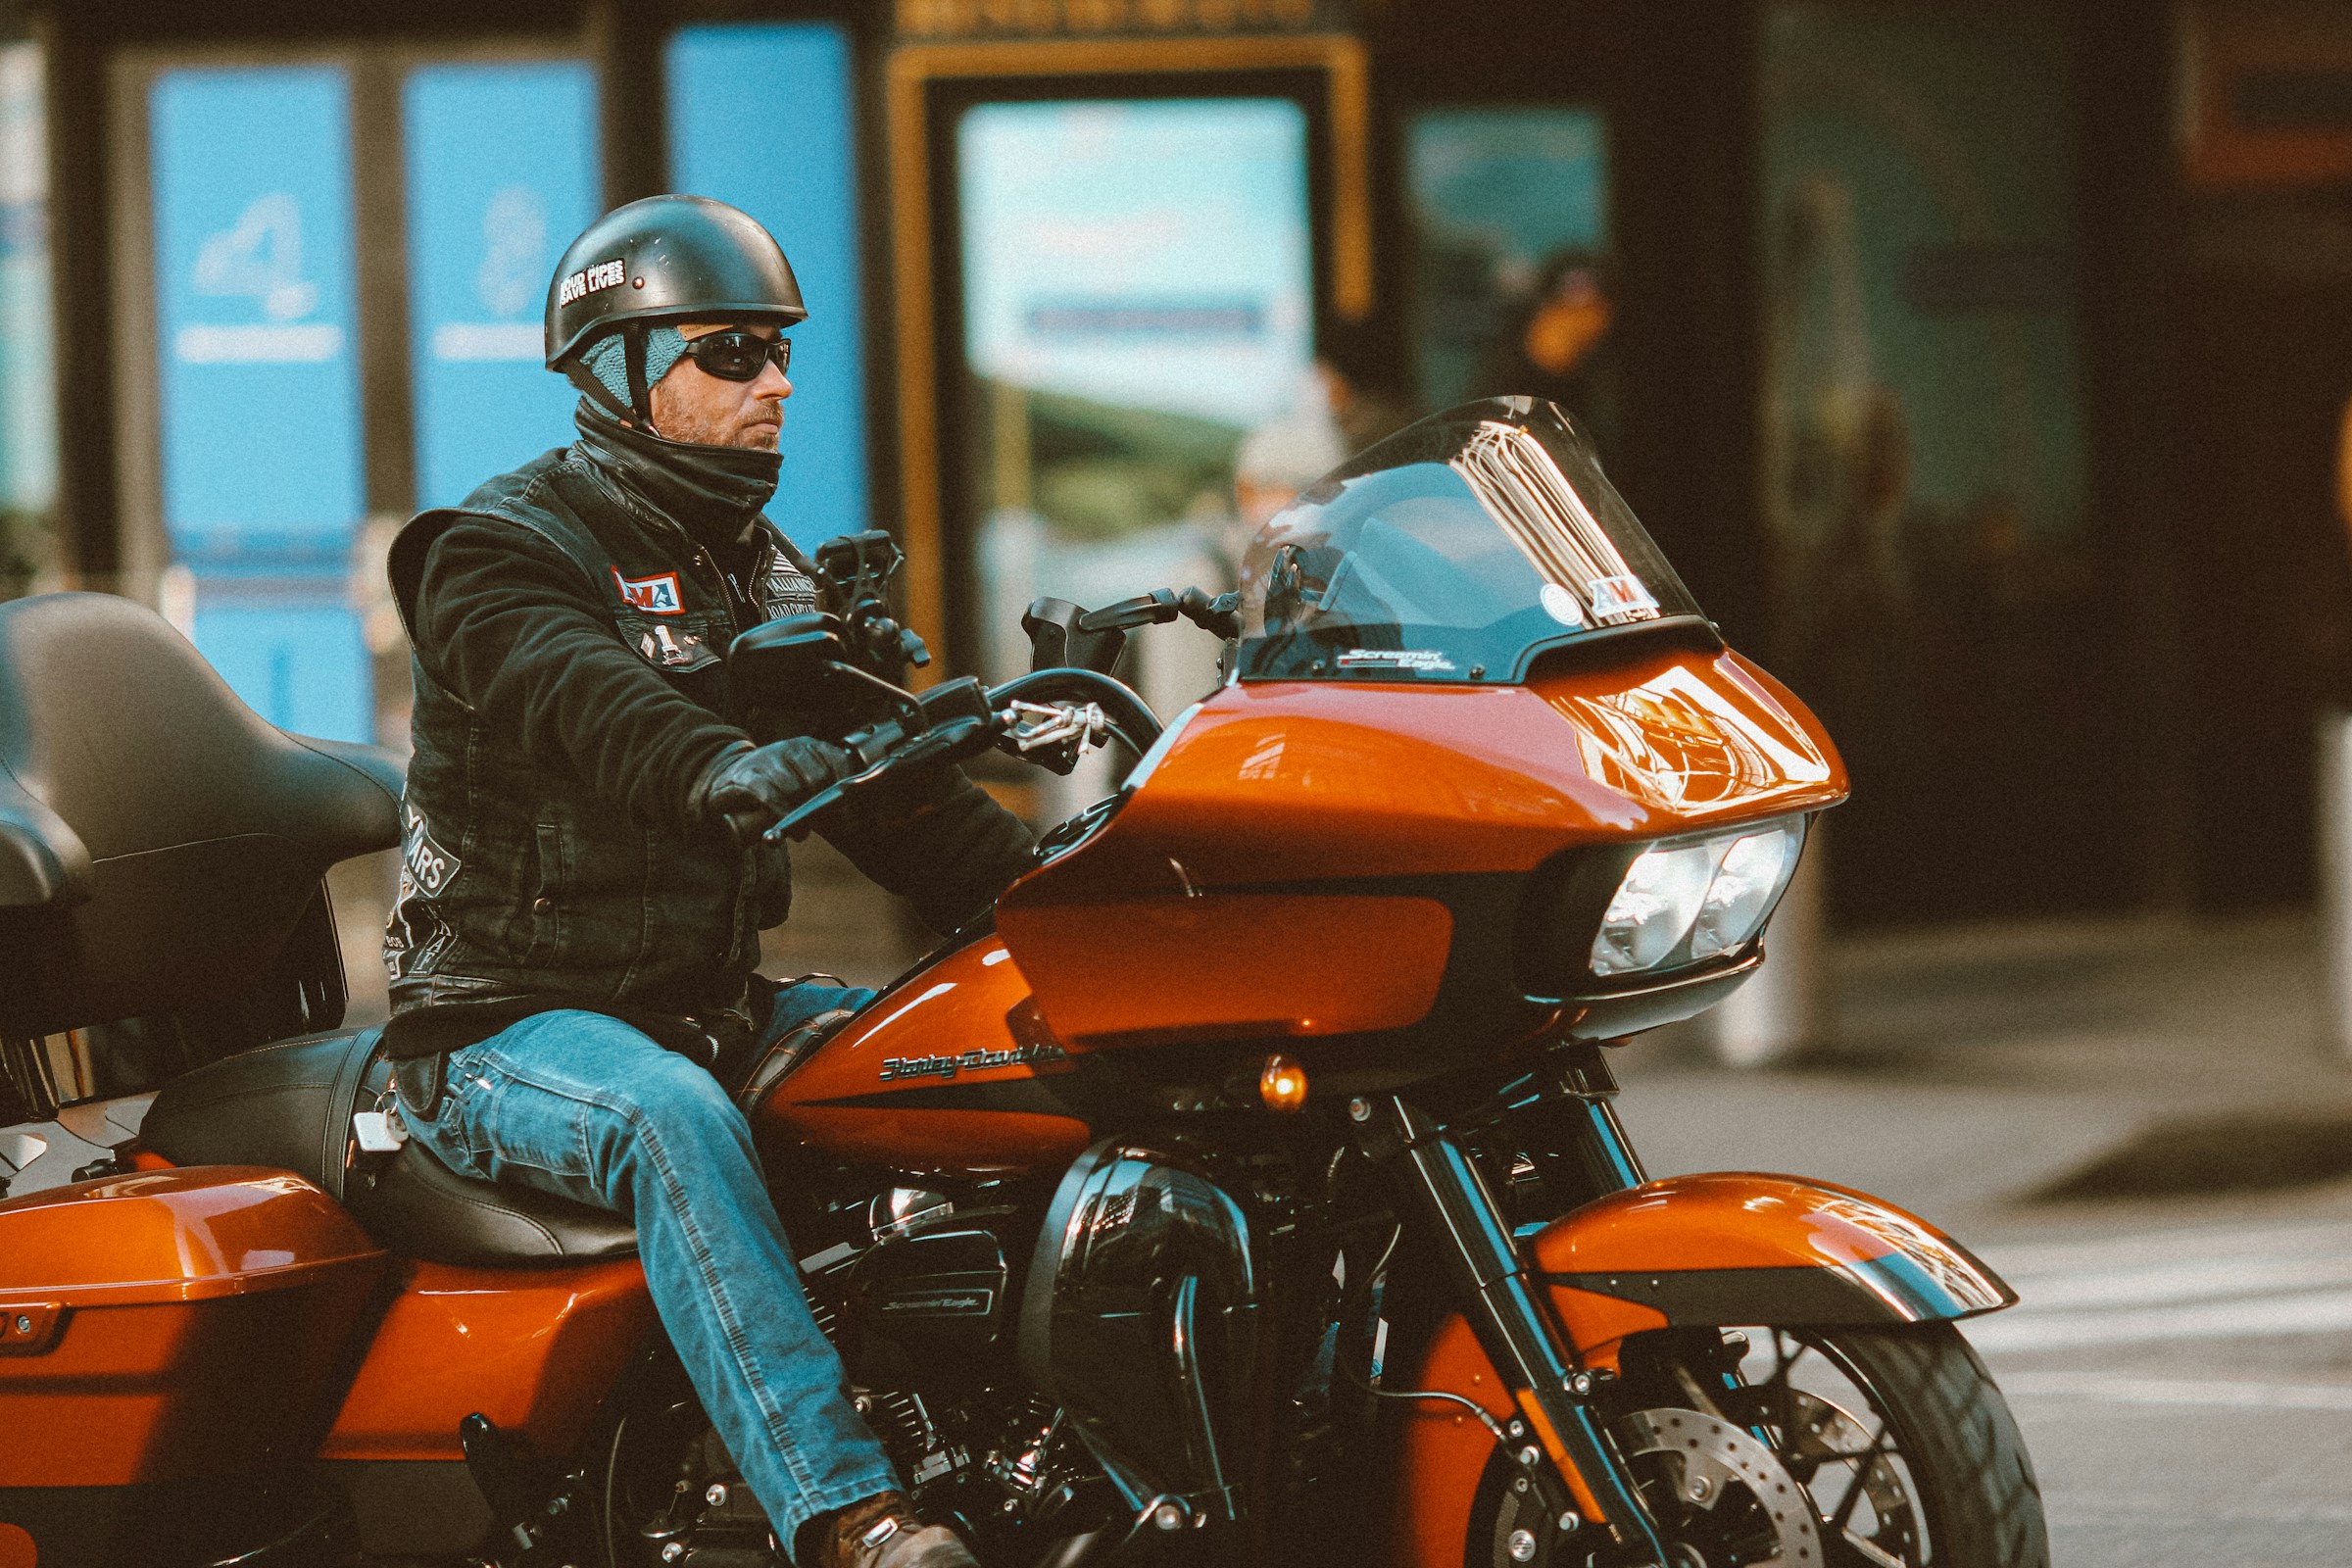 Man in a black leather jacket and blue jeans riding a motorcycle